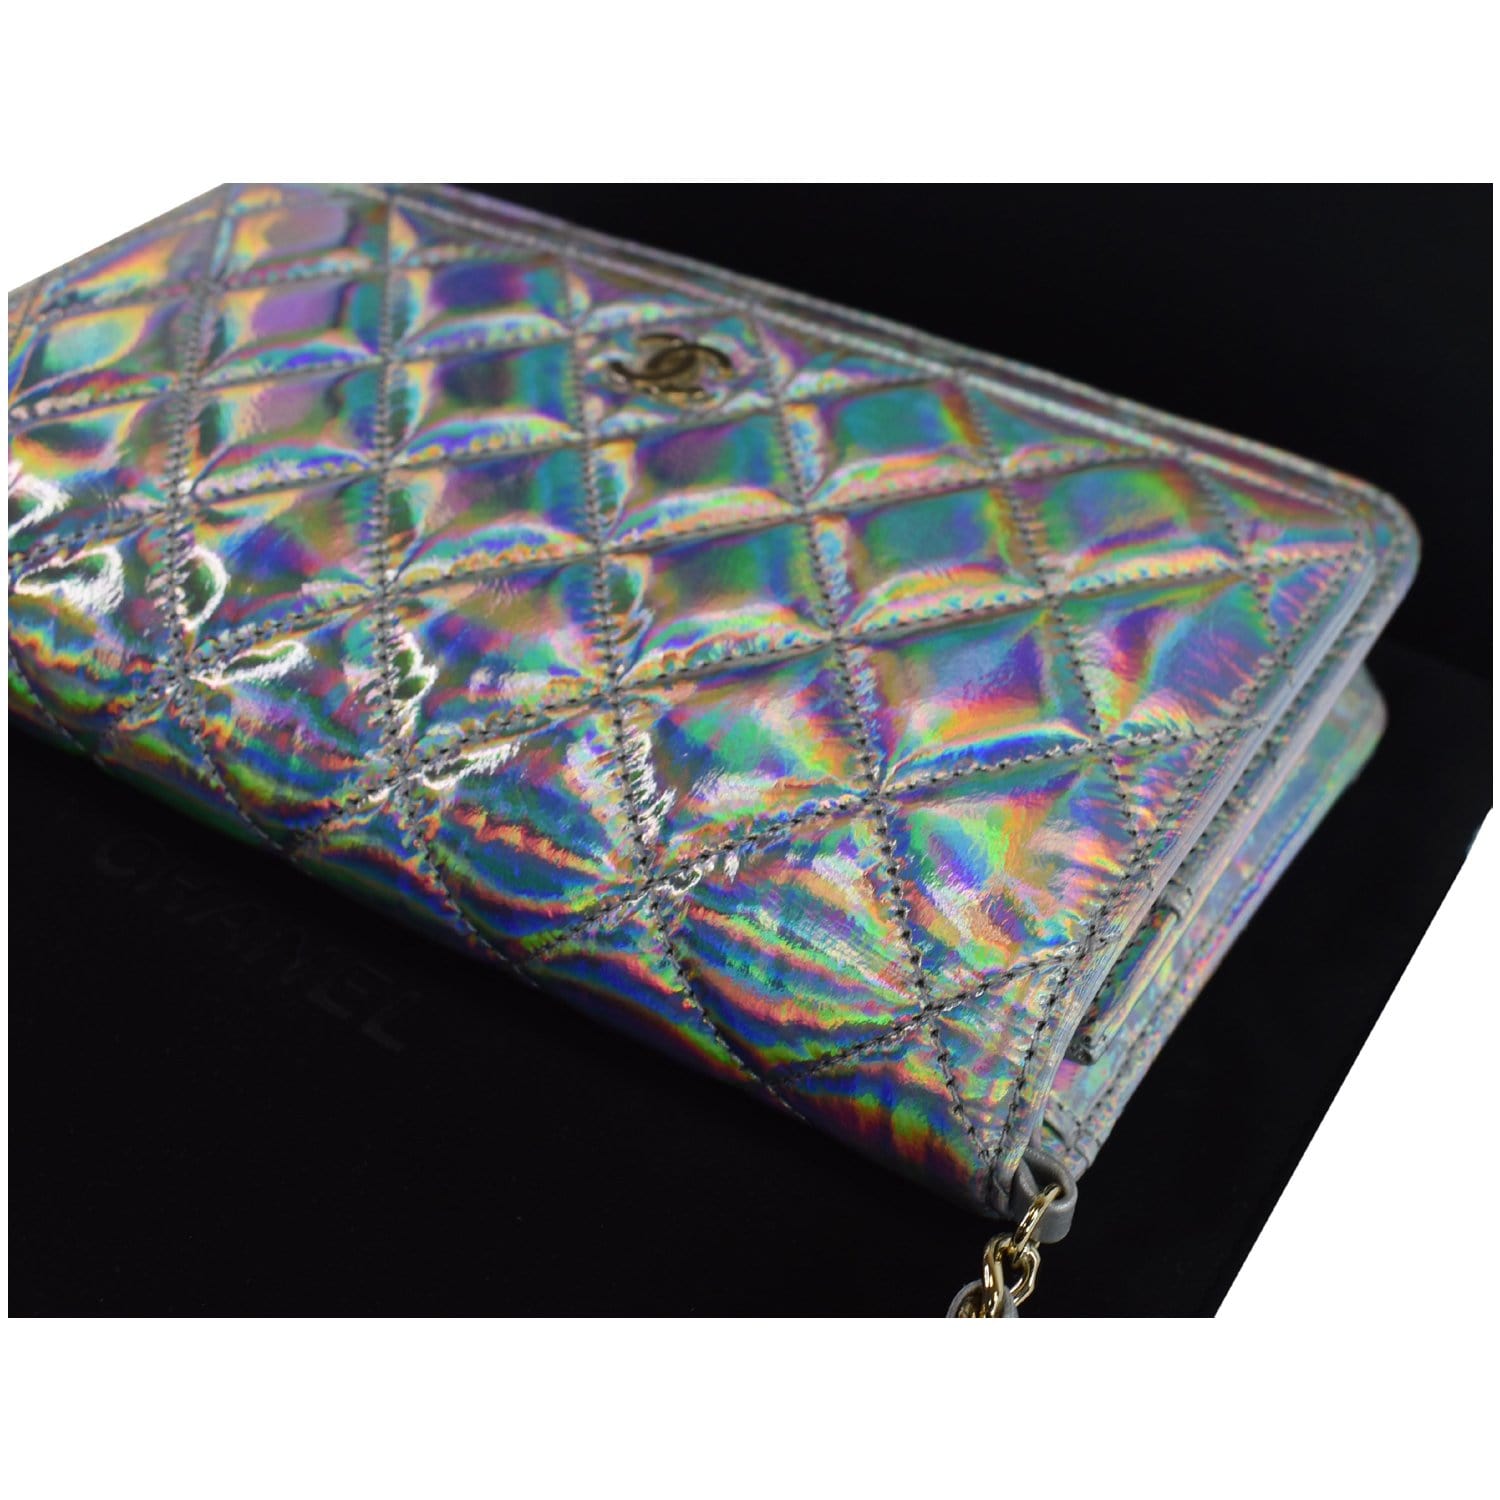 CHANEL Timeless Classic WOC Goatskin Wallet on Chain Bag Iridescent Si